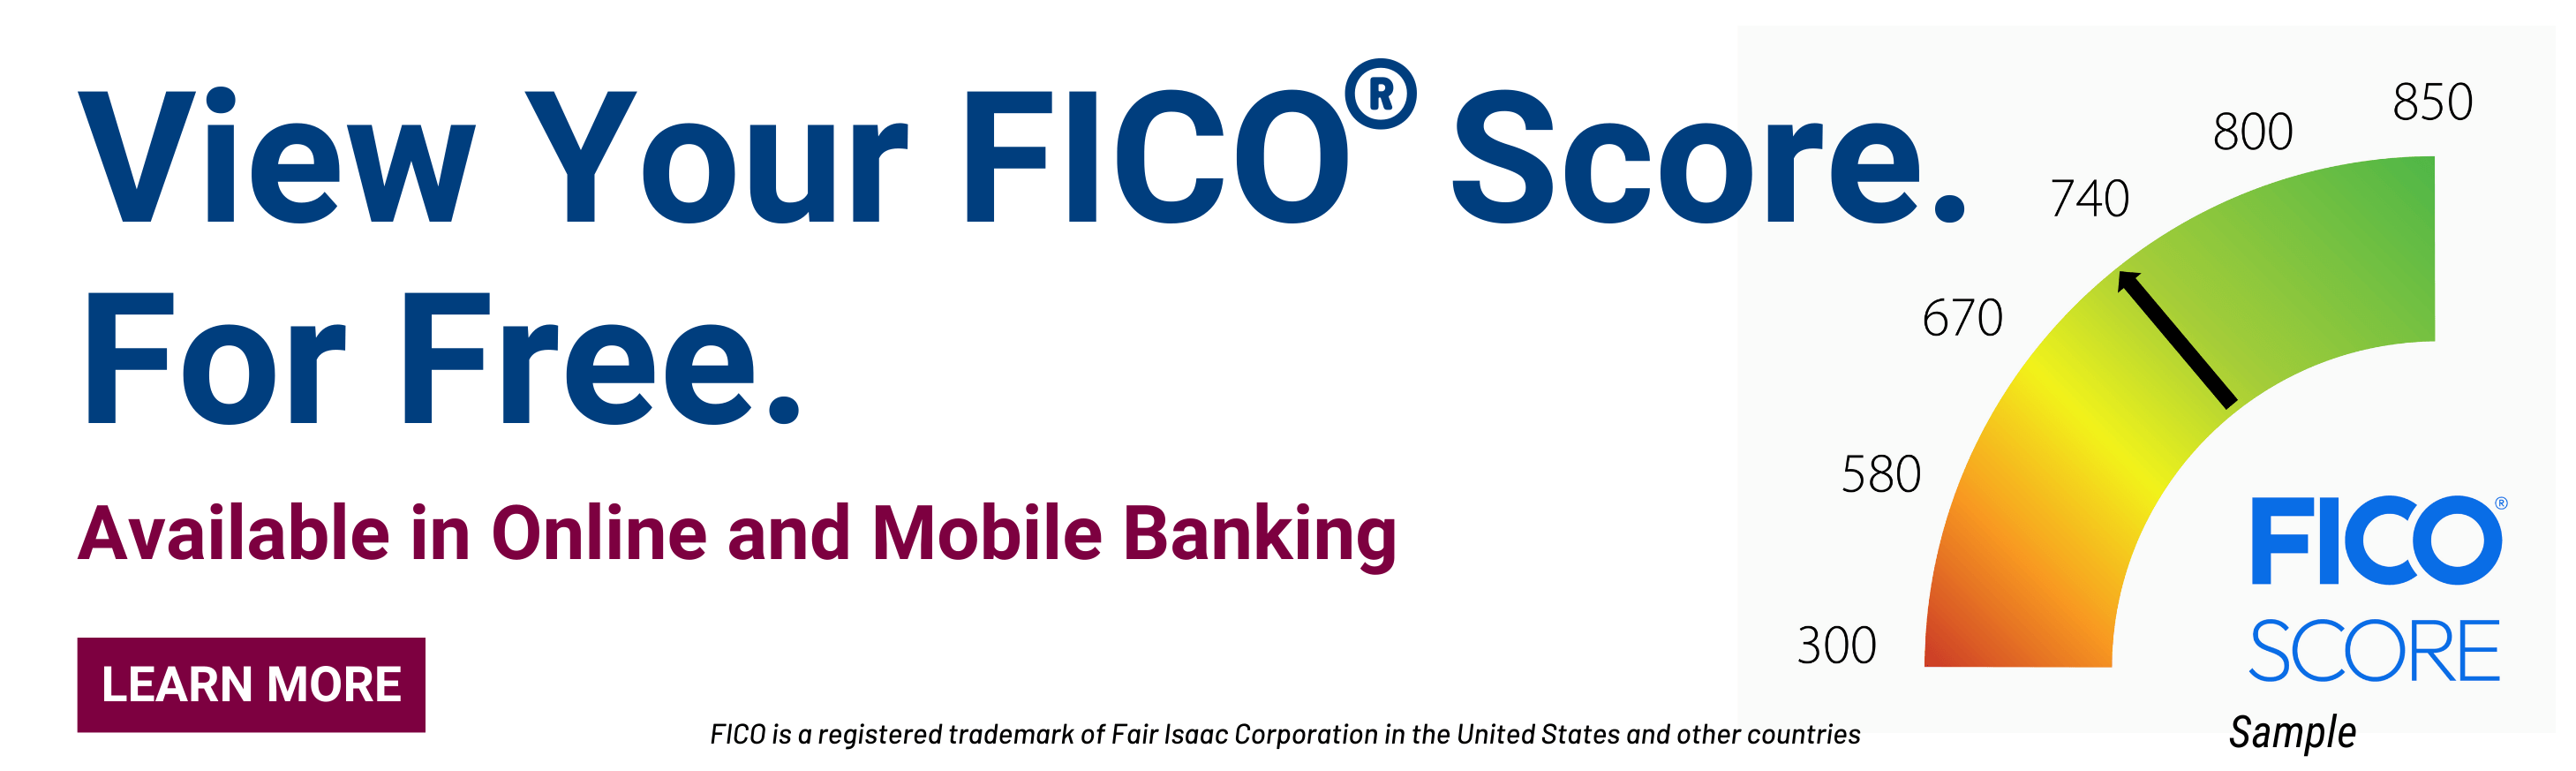 View Your FICO Score for Free